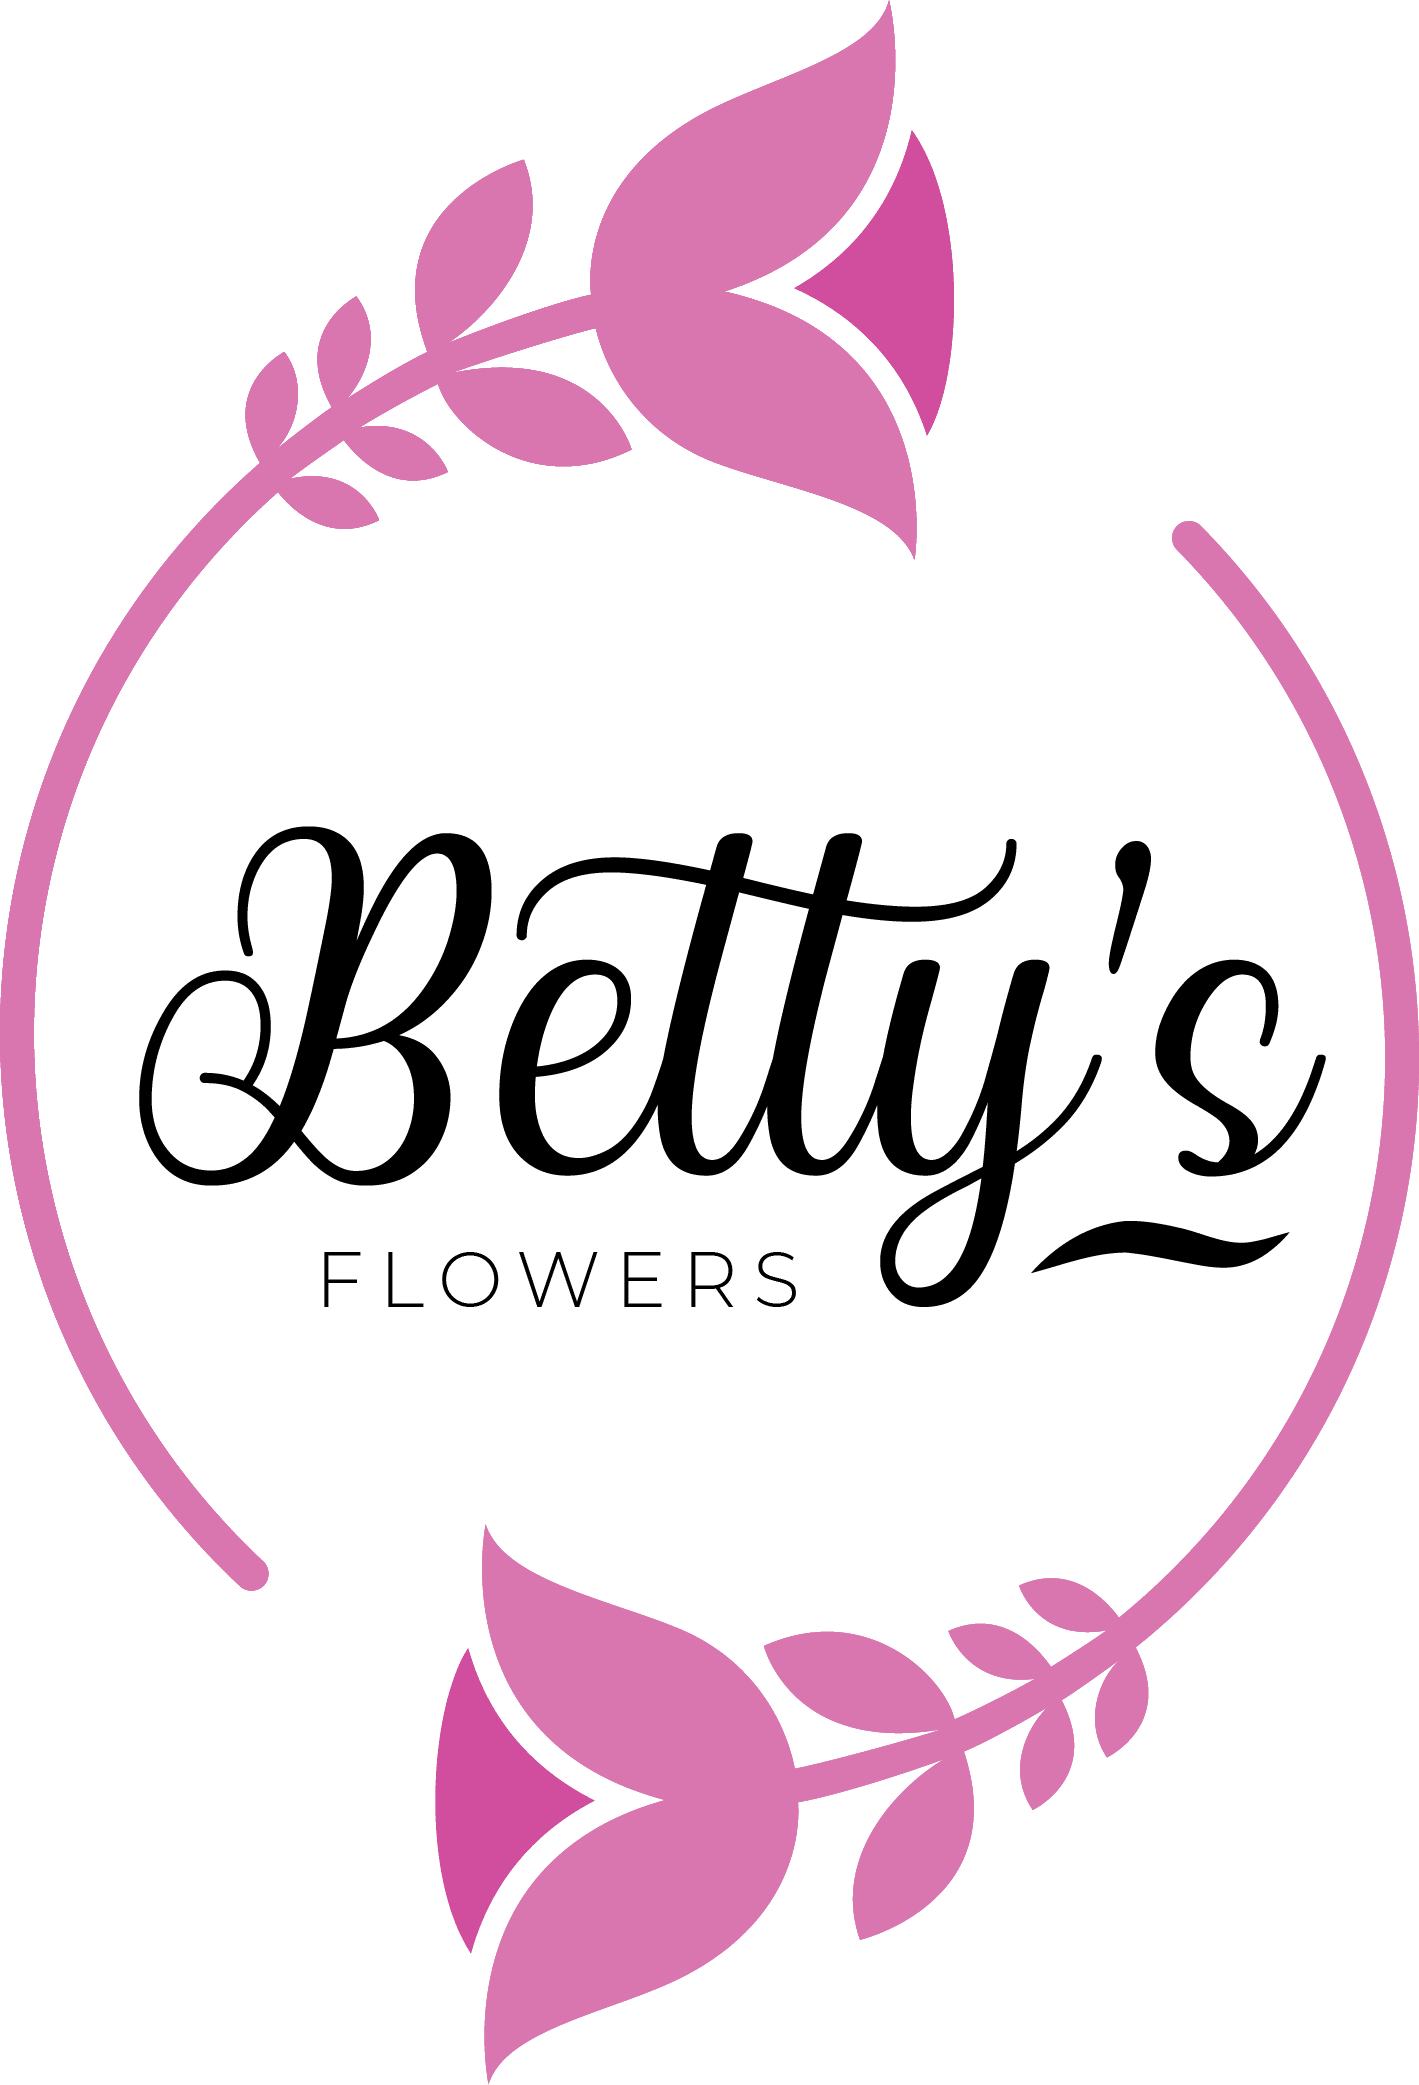 About Us | Betty's Flowers